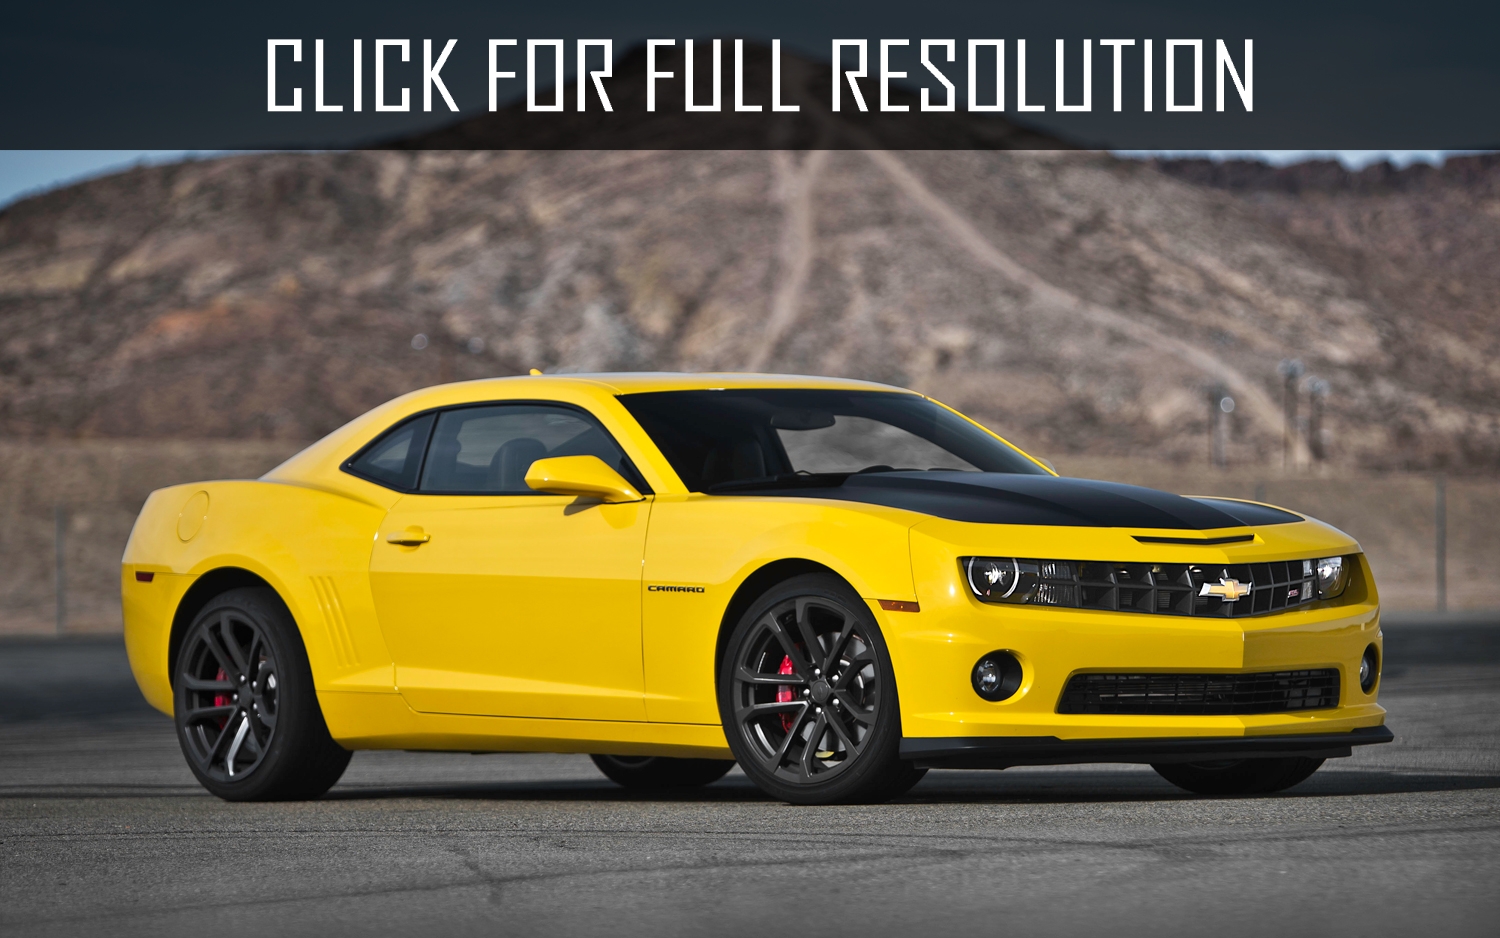 Chevrolet Camaro Gt reviews, prices, ratings with